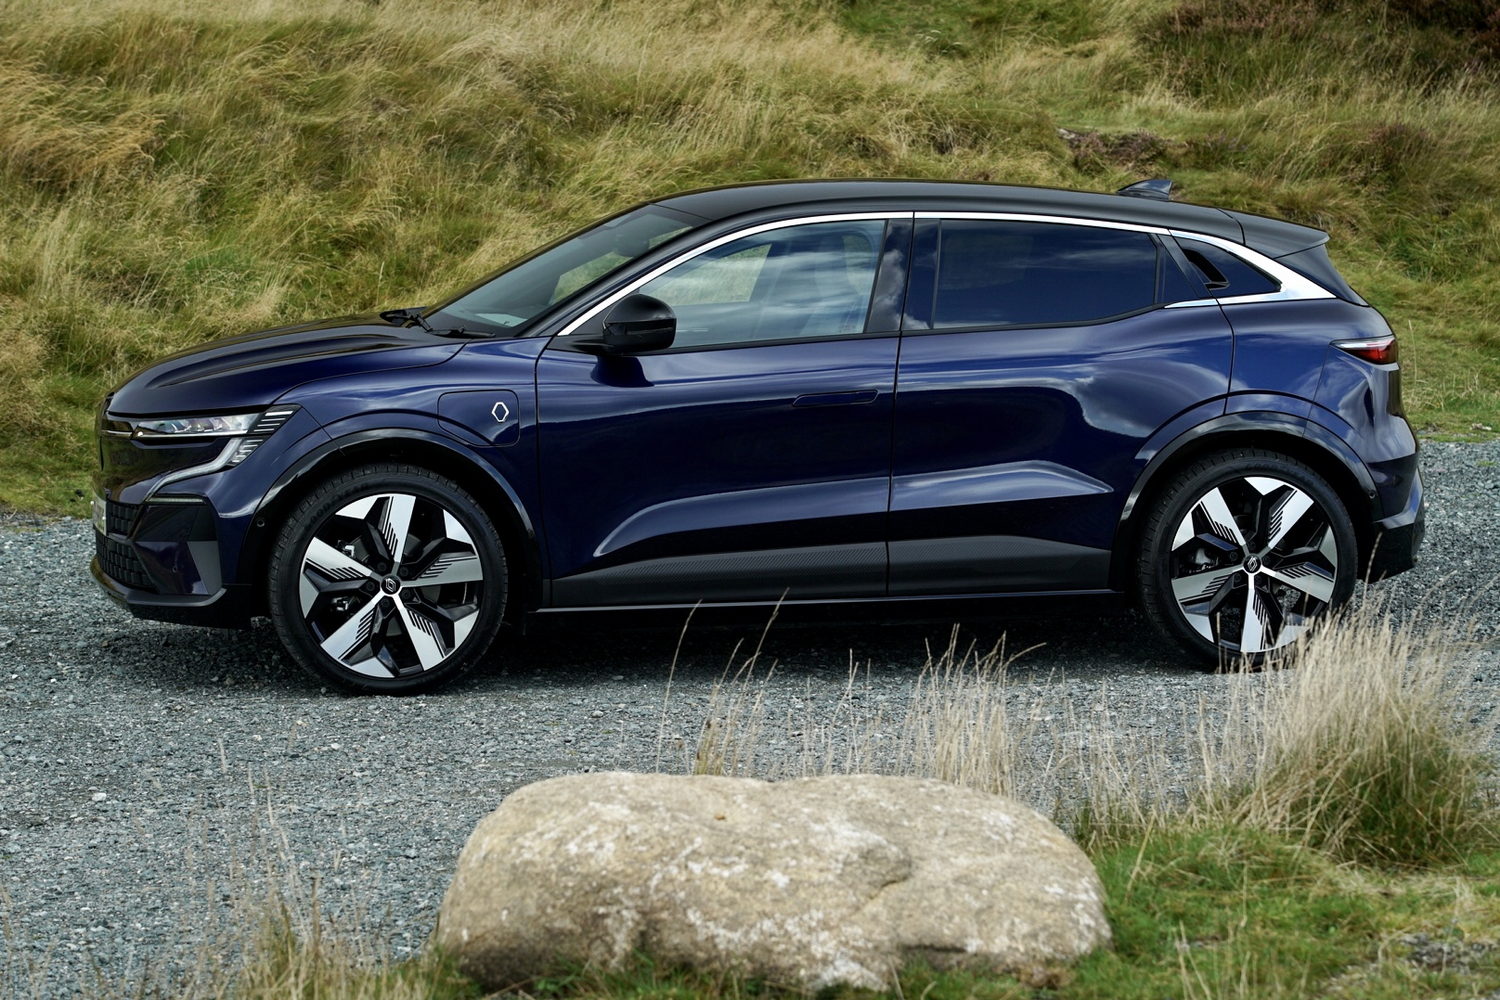 Electric Megane costs €37,495 in Ireland